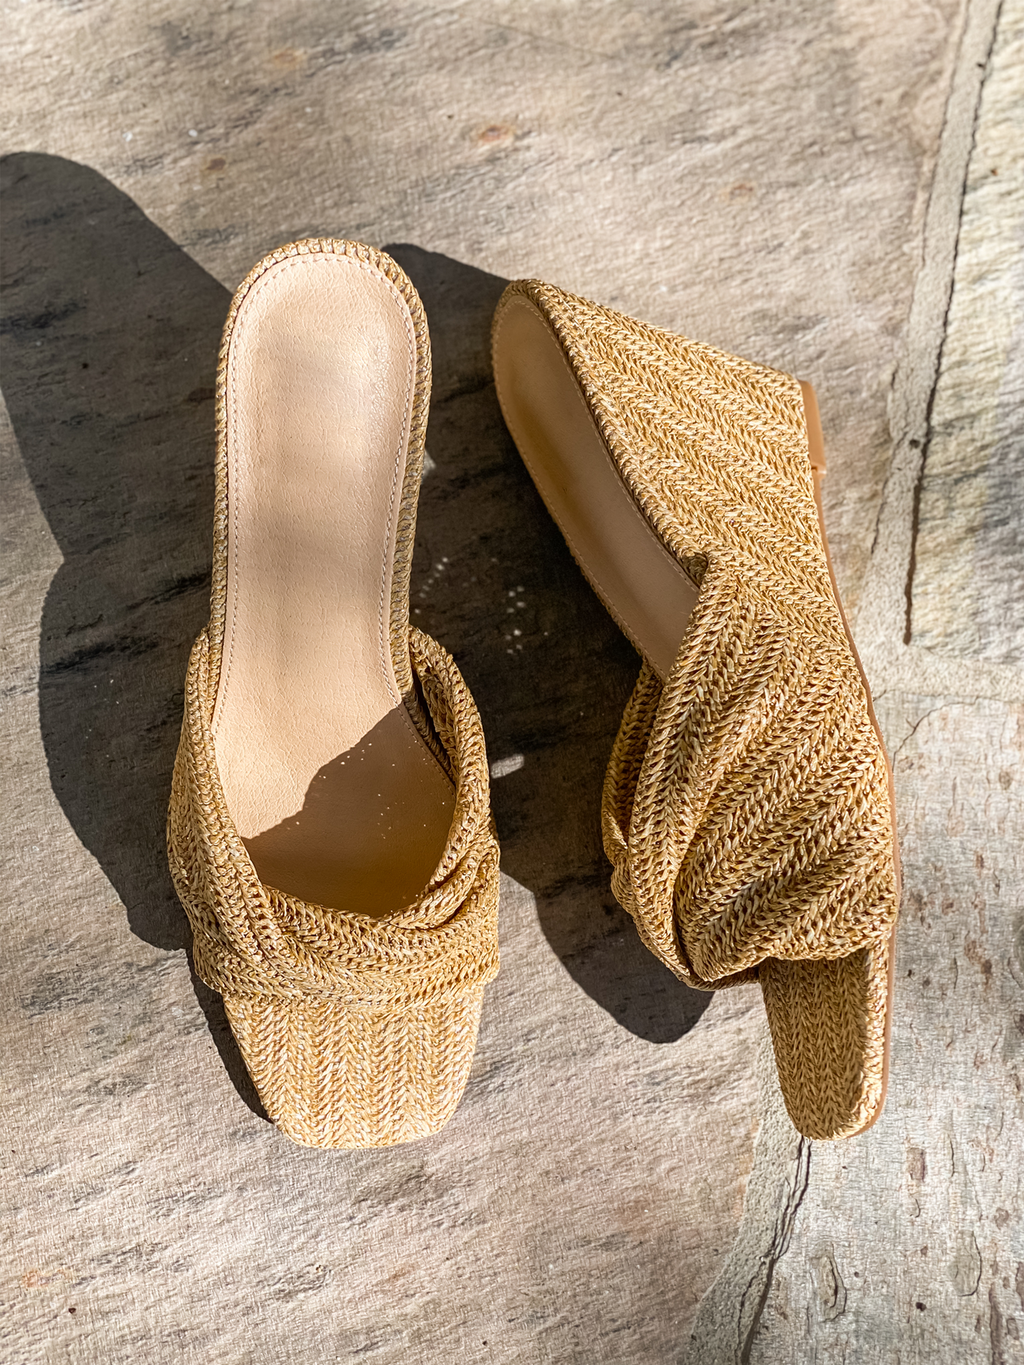 Jovie Wedge Sandals in Camel - Final Sale - Stitch And Feather